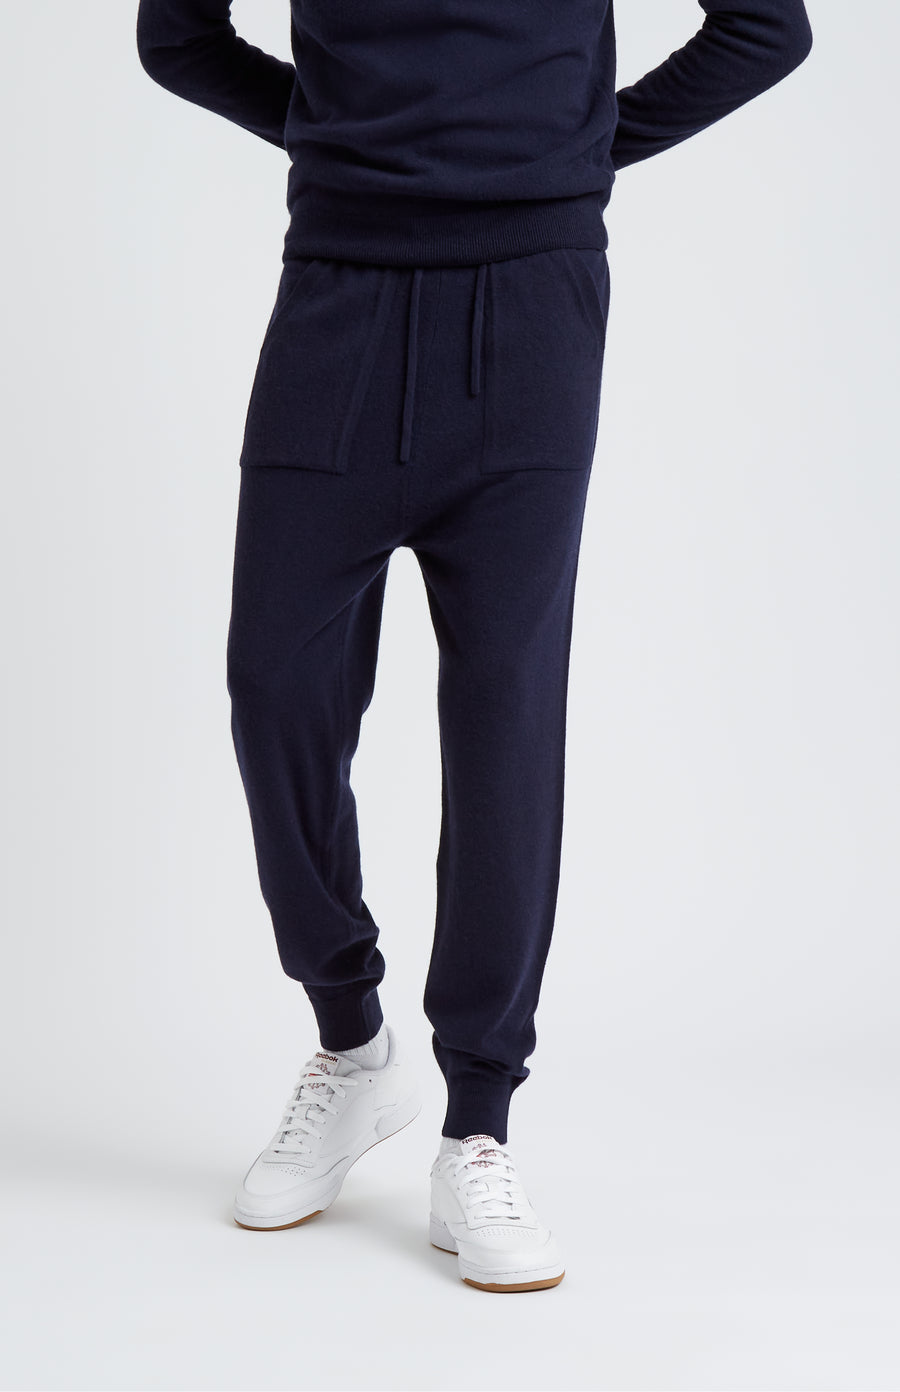 Pringle of Scotland Men's Knitted Merino Cashmere Joggers In Navy on model